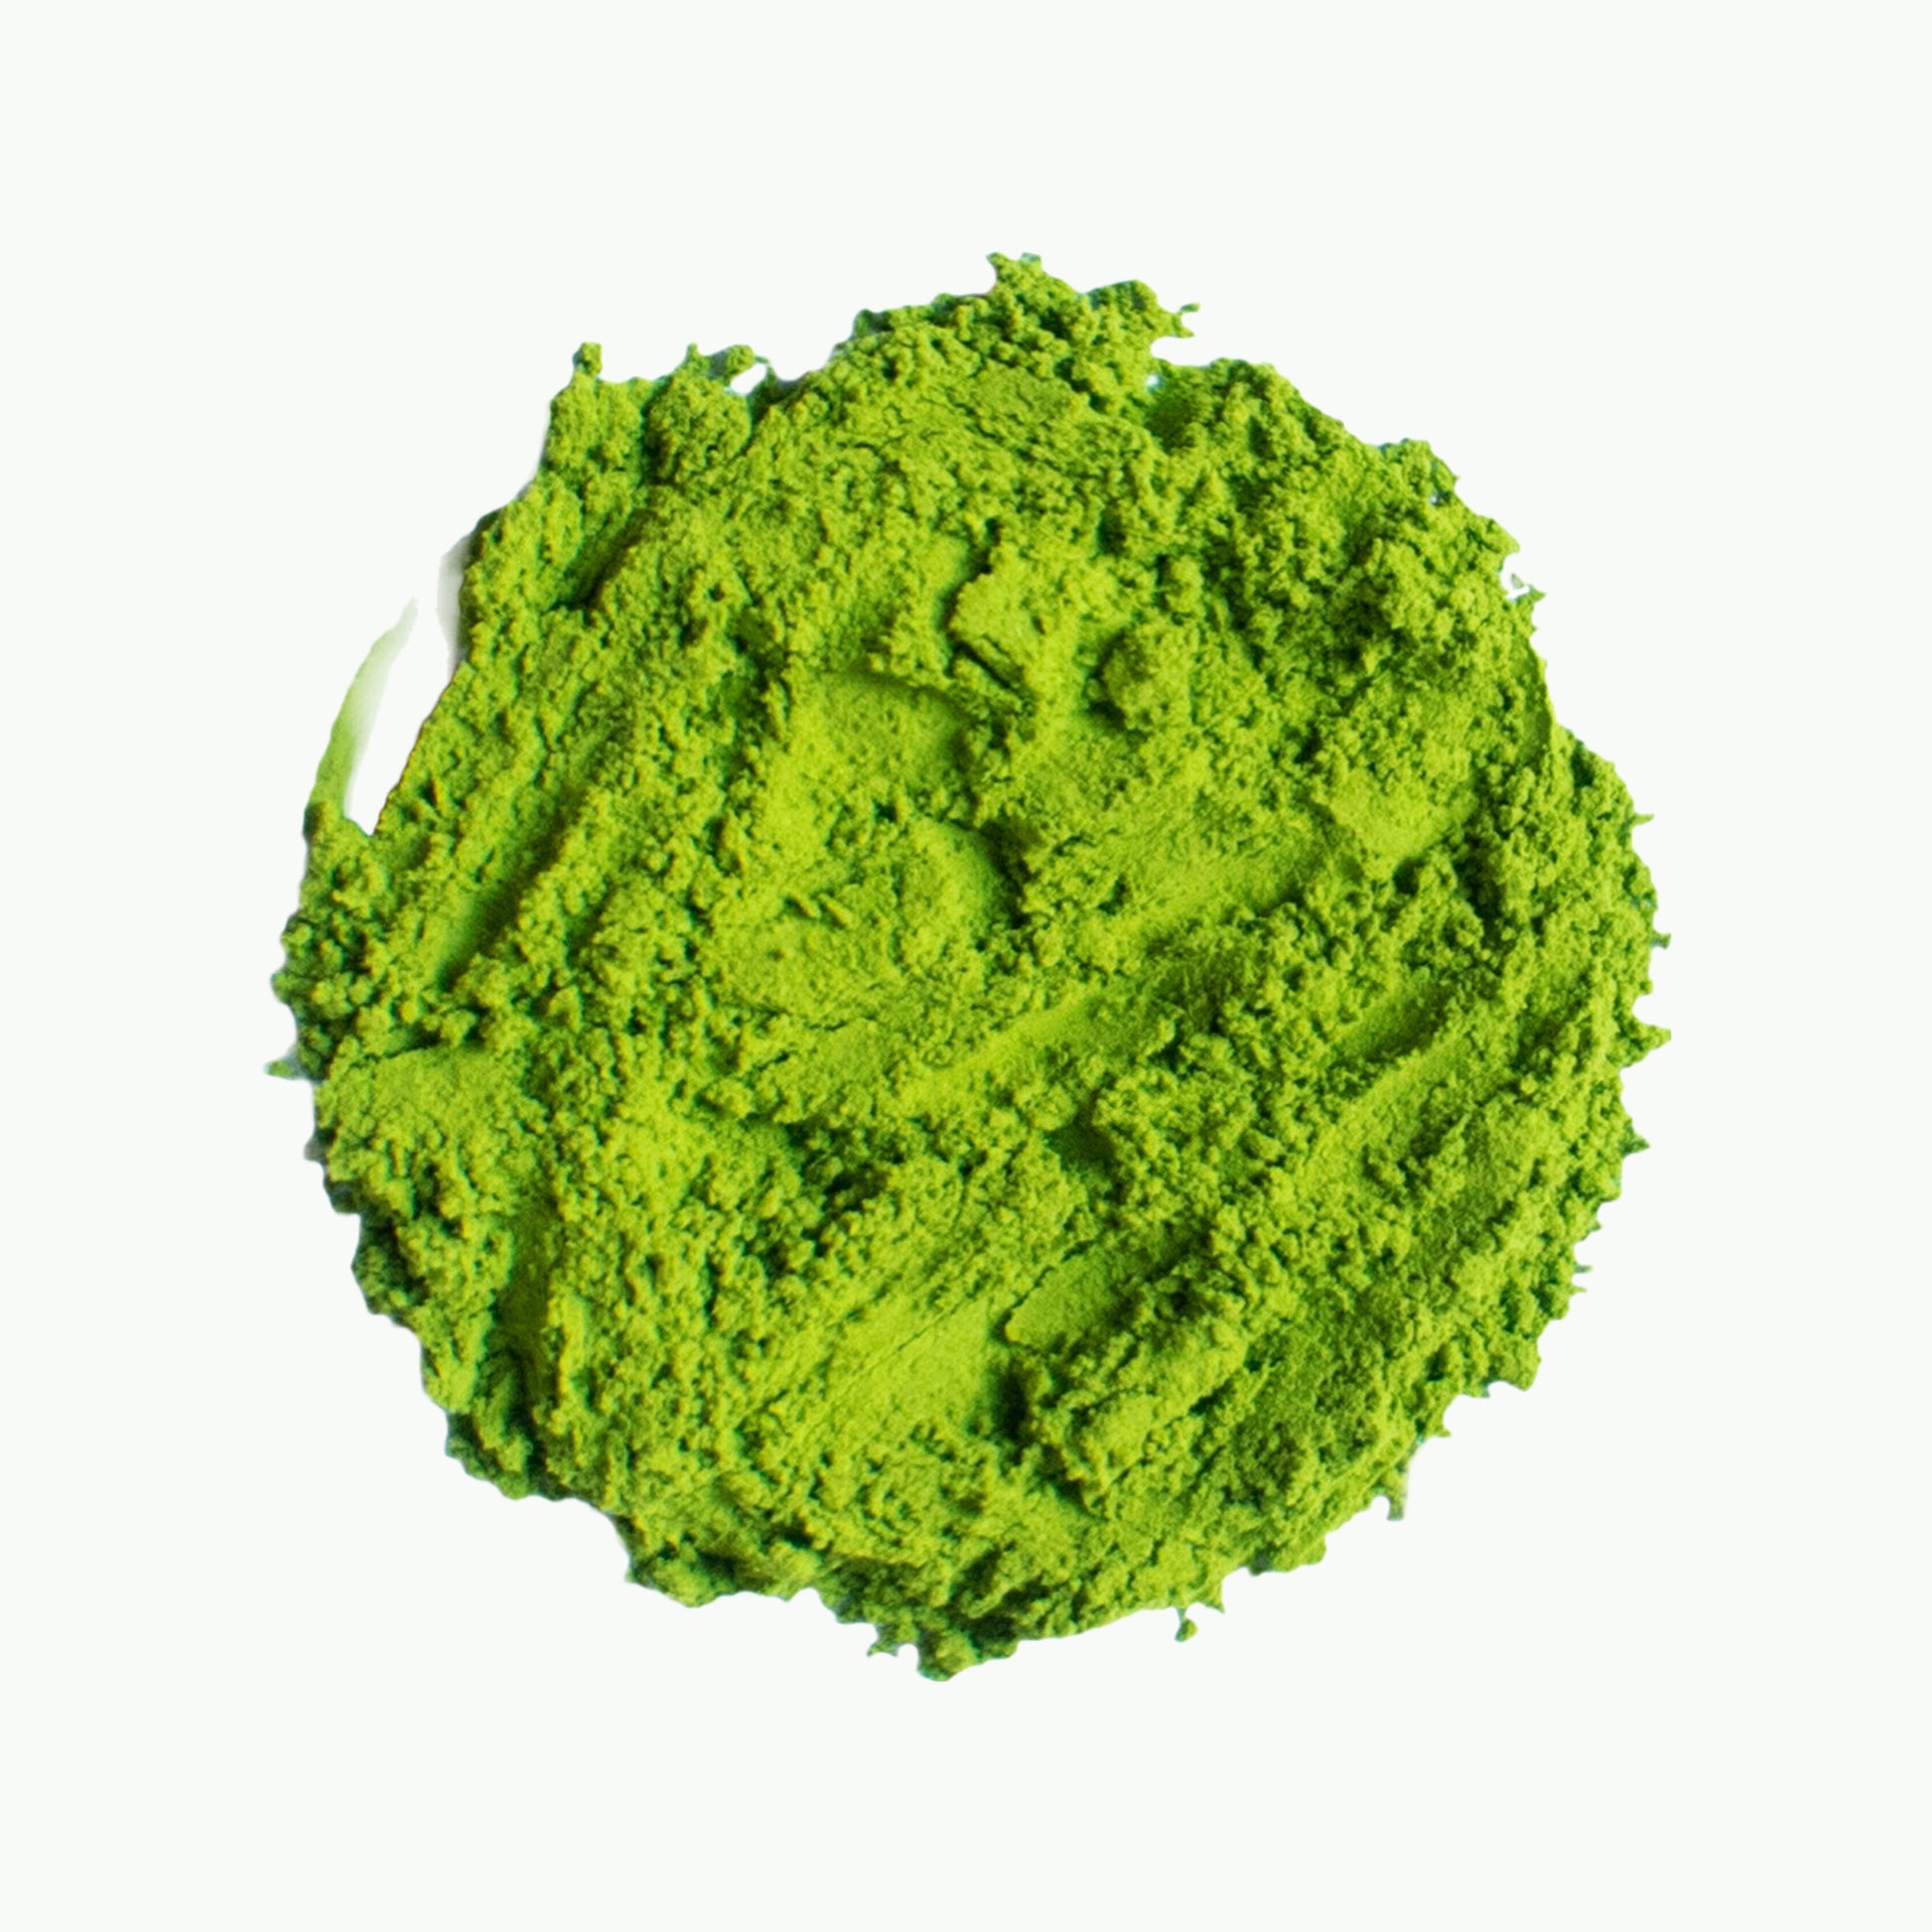 The color of Culinary Grade Sumo Matcha